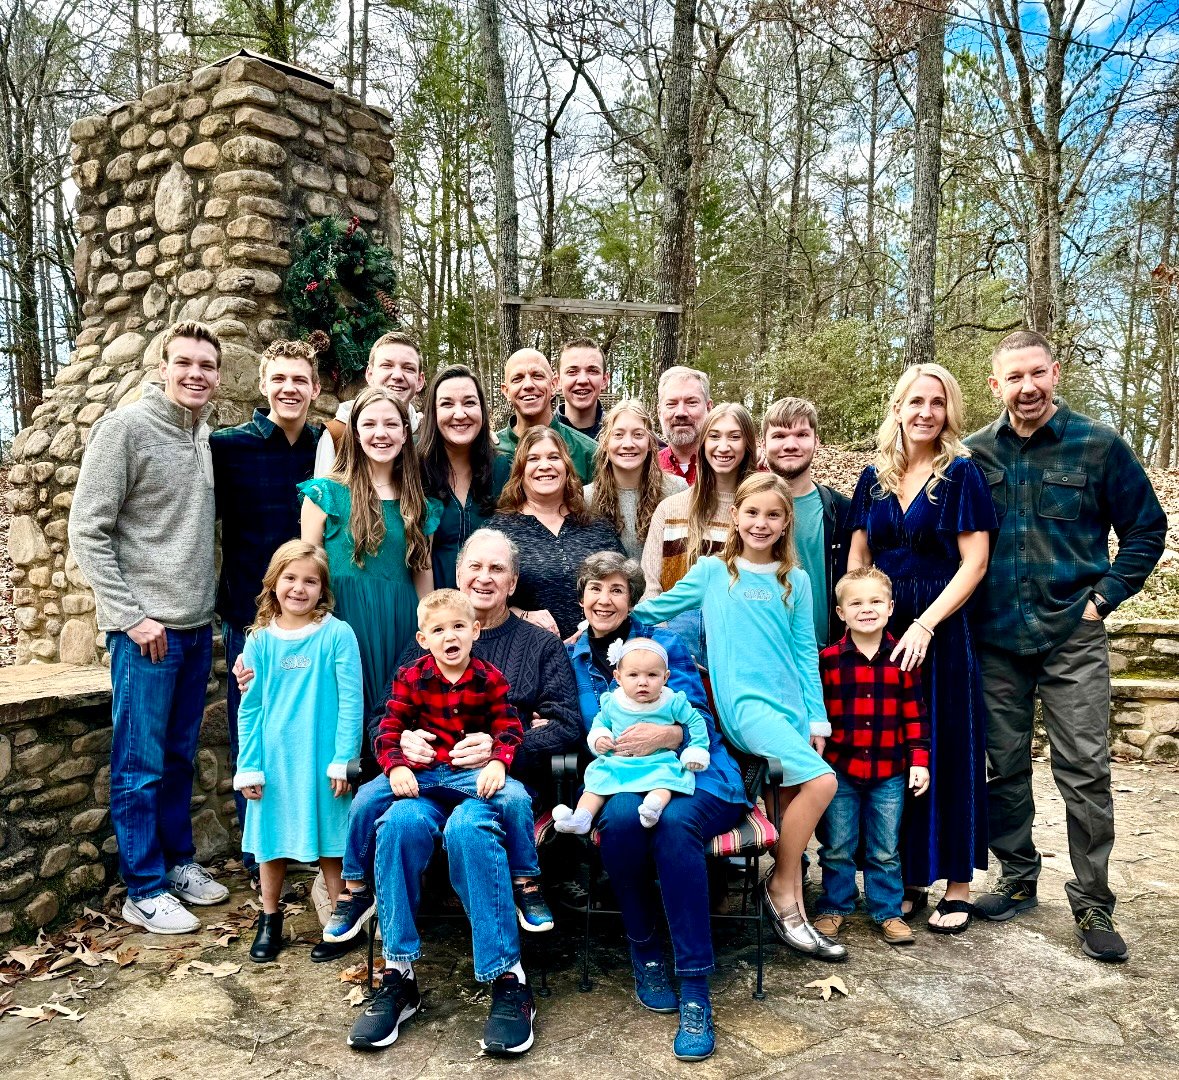 Our family together in Oxford for Christmas 2023: Jerry & family from Dothan, Alabama; Lauren & family from Denham Springs, LA; Tiffany and family from Crawford, TX